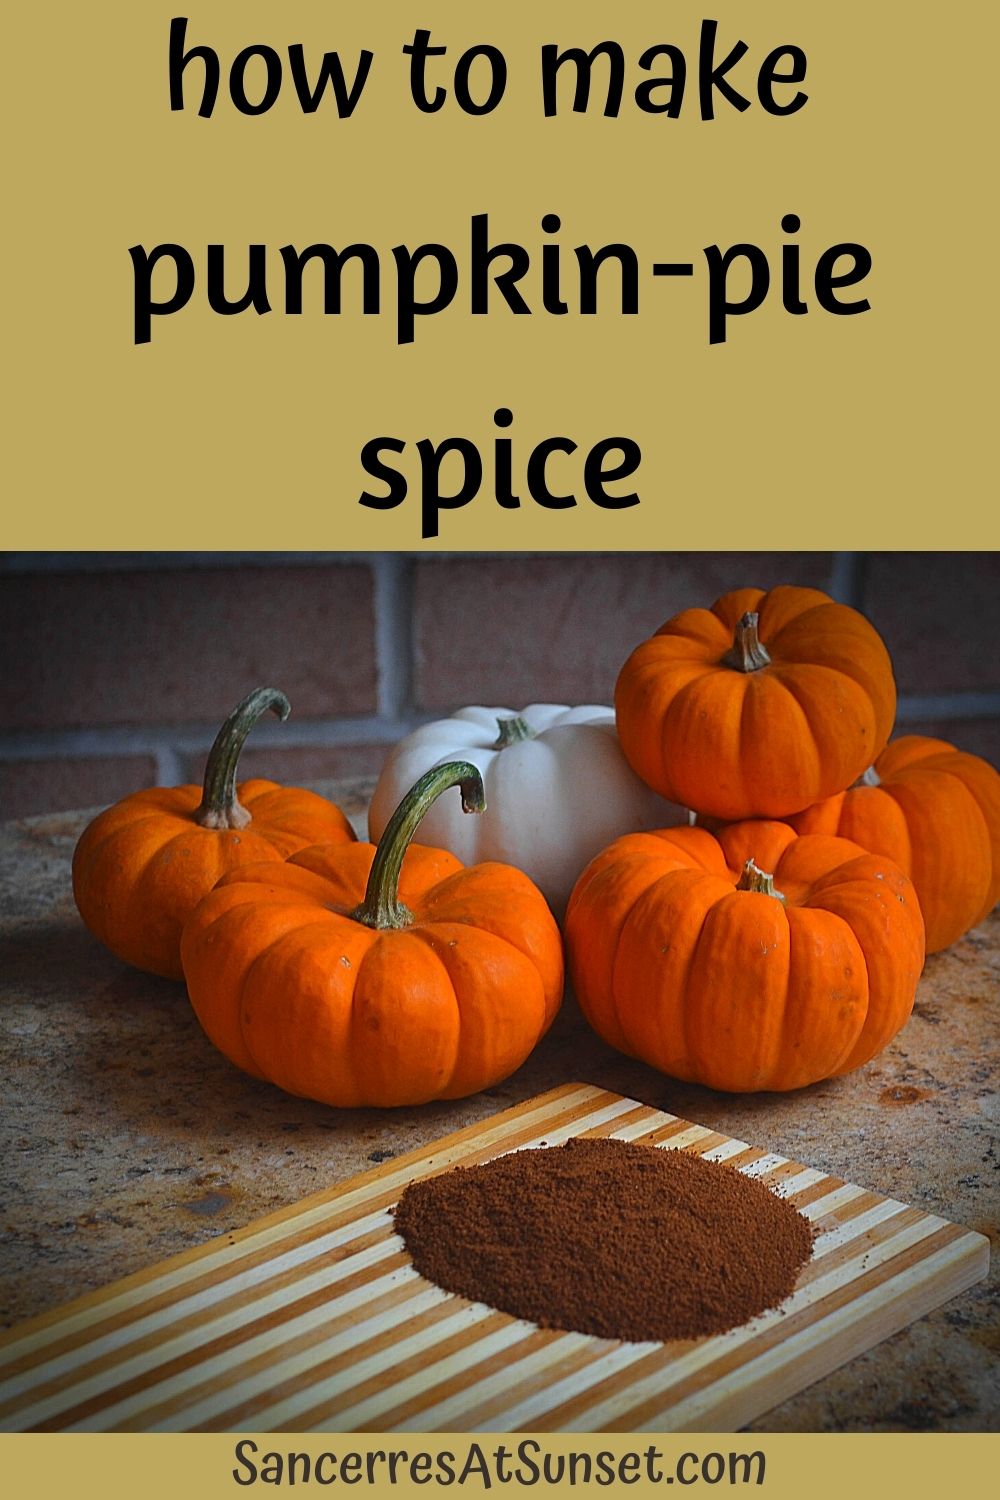 How to Make Your Own Pumpkin-Pie Spice